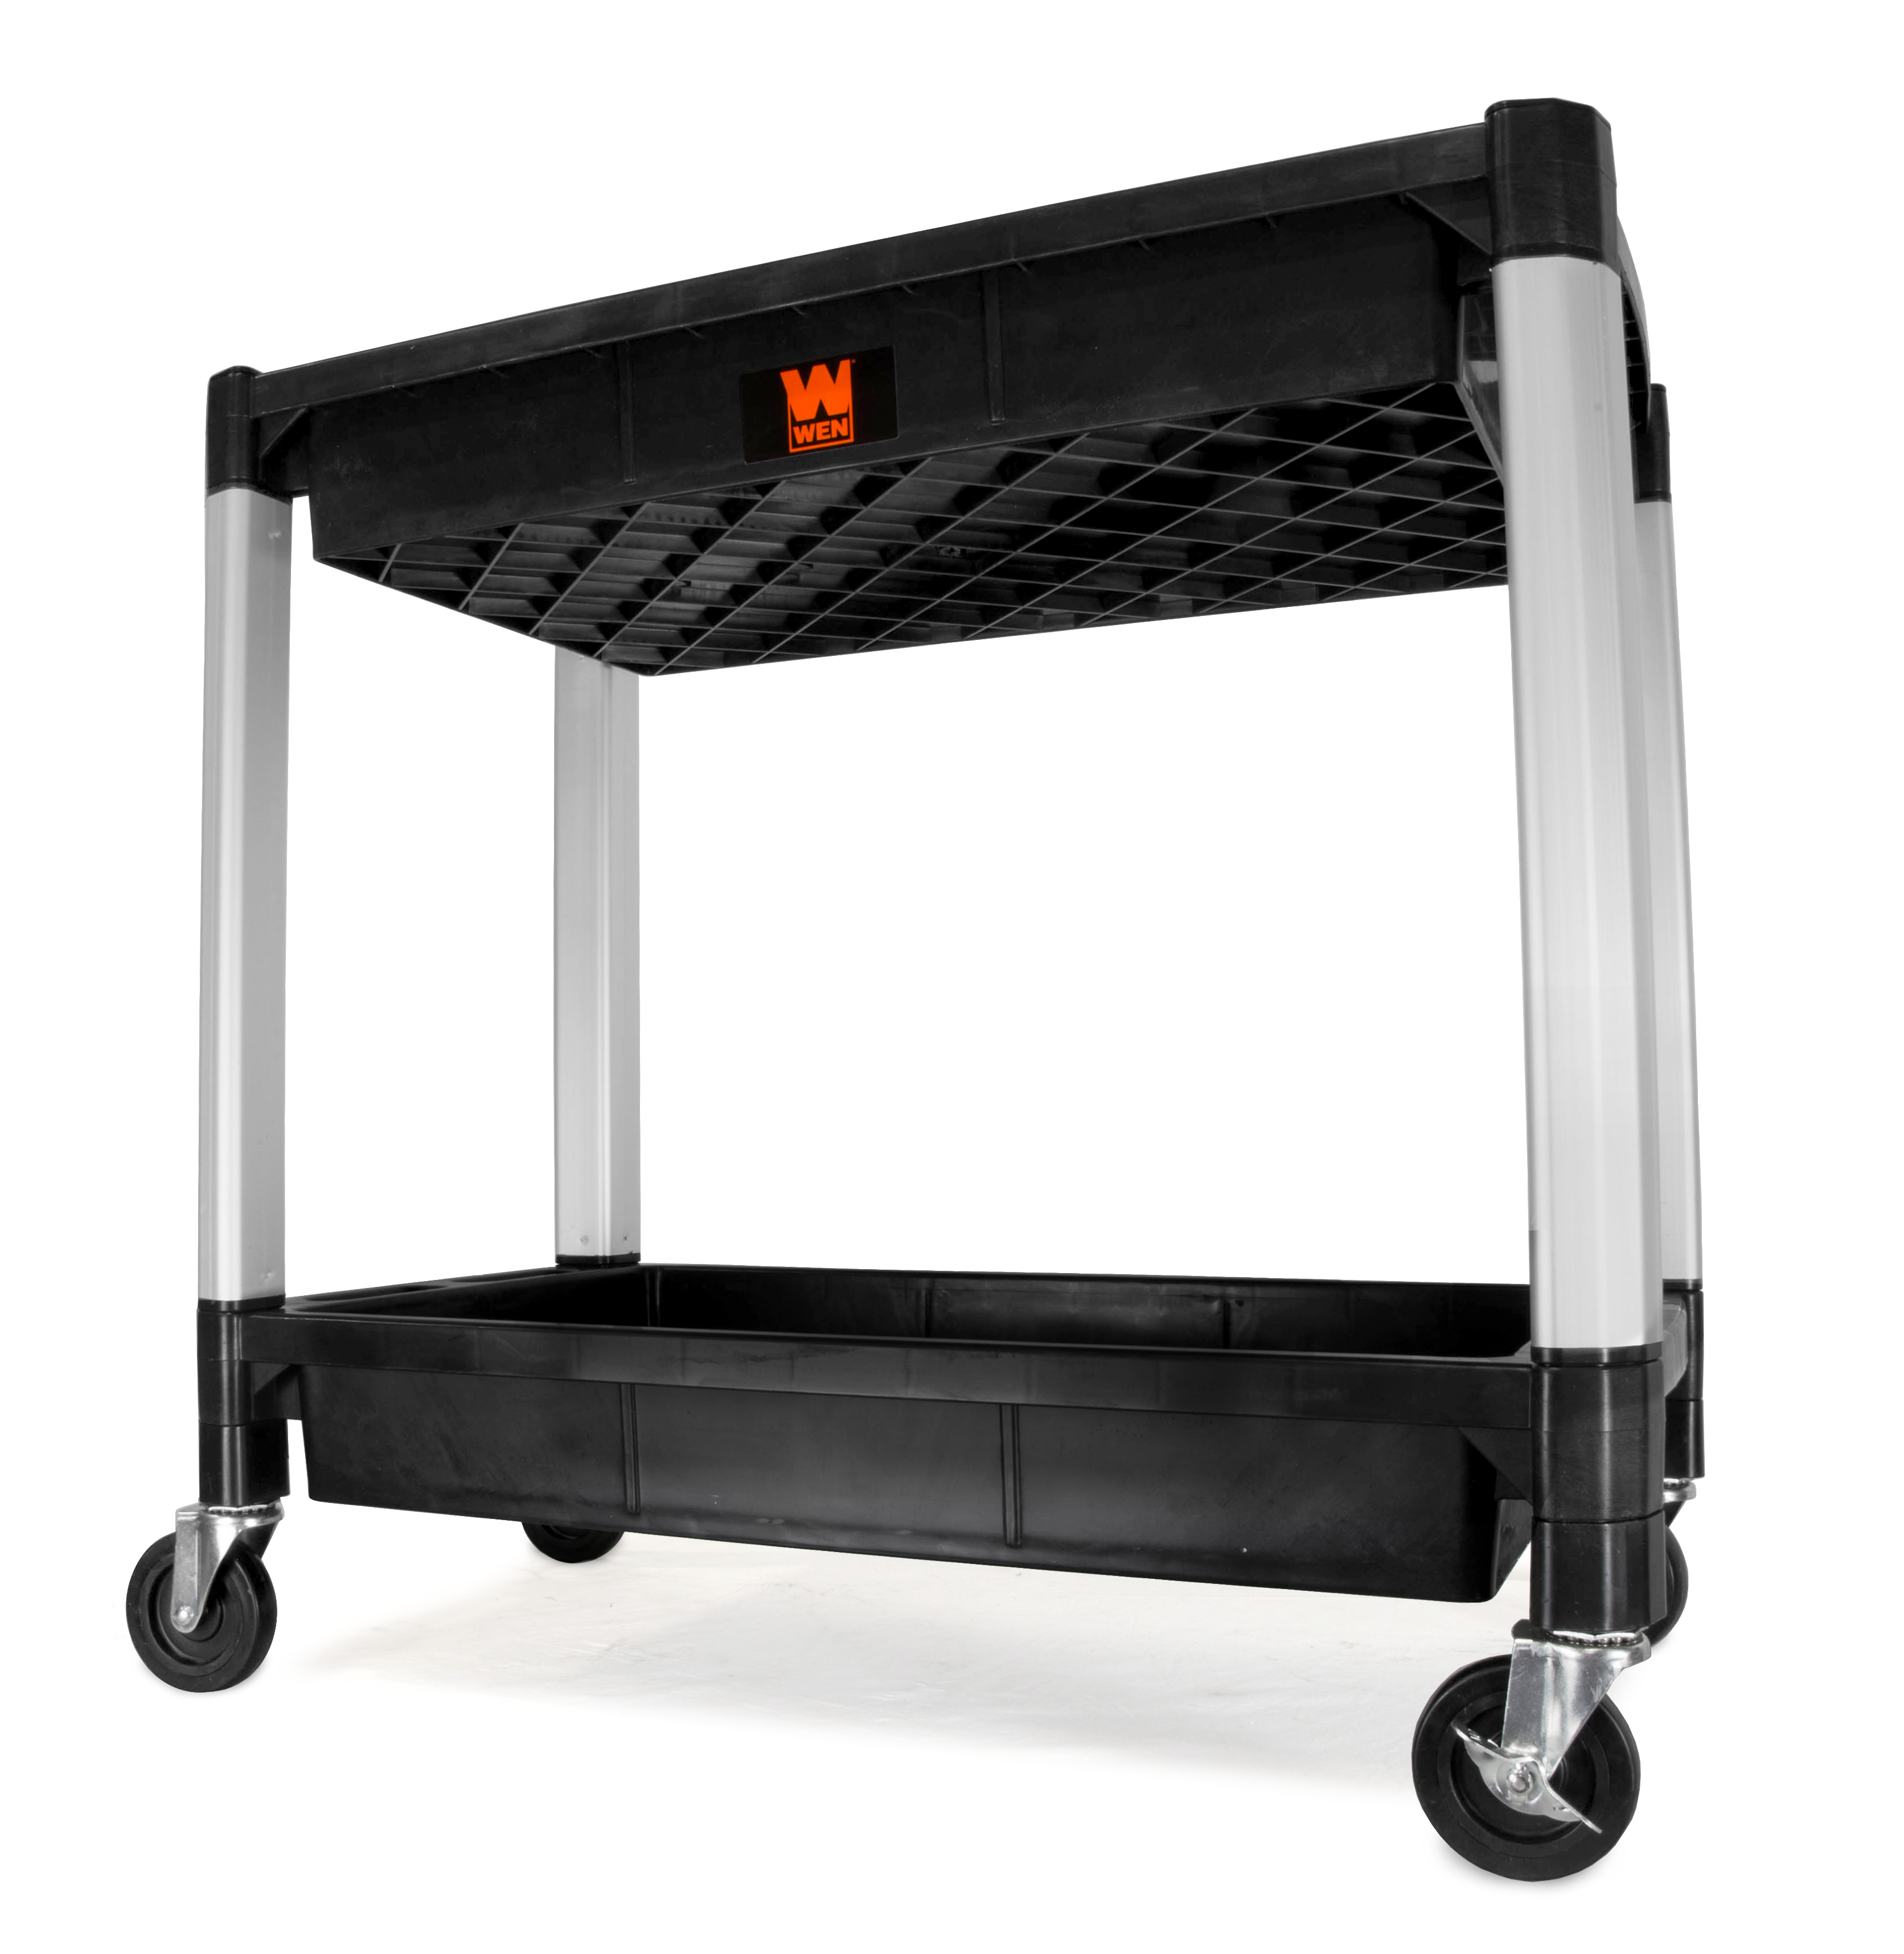 WEN Two-Tray 300-Pound Capacity Double Decker Service and Utility Cart, 73162 - image 1 of 5